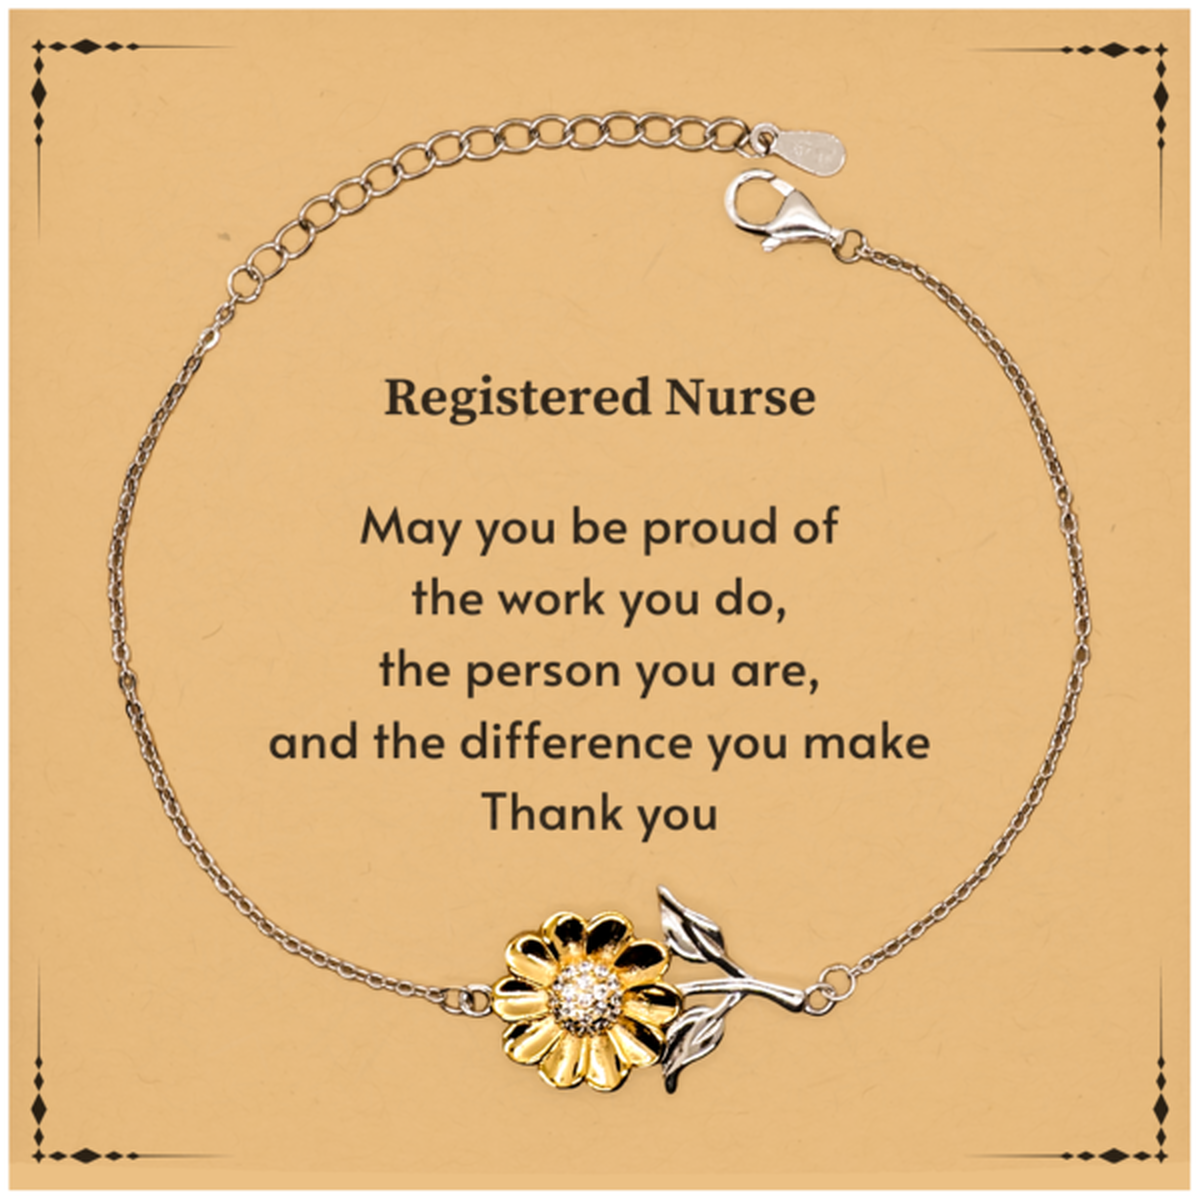 Heartwarming Sunflower Bracelet Retirement Coworkers Gifts for Registered Nurse, Registered Nurse May You be proud of the work you do, the person you are Gifts for Boss Men Women Friends